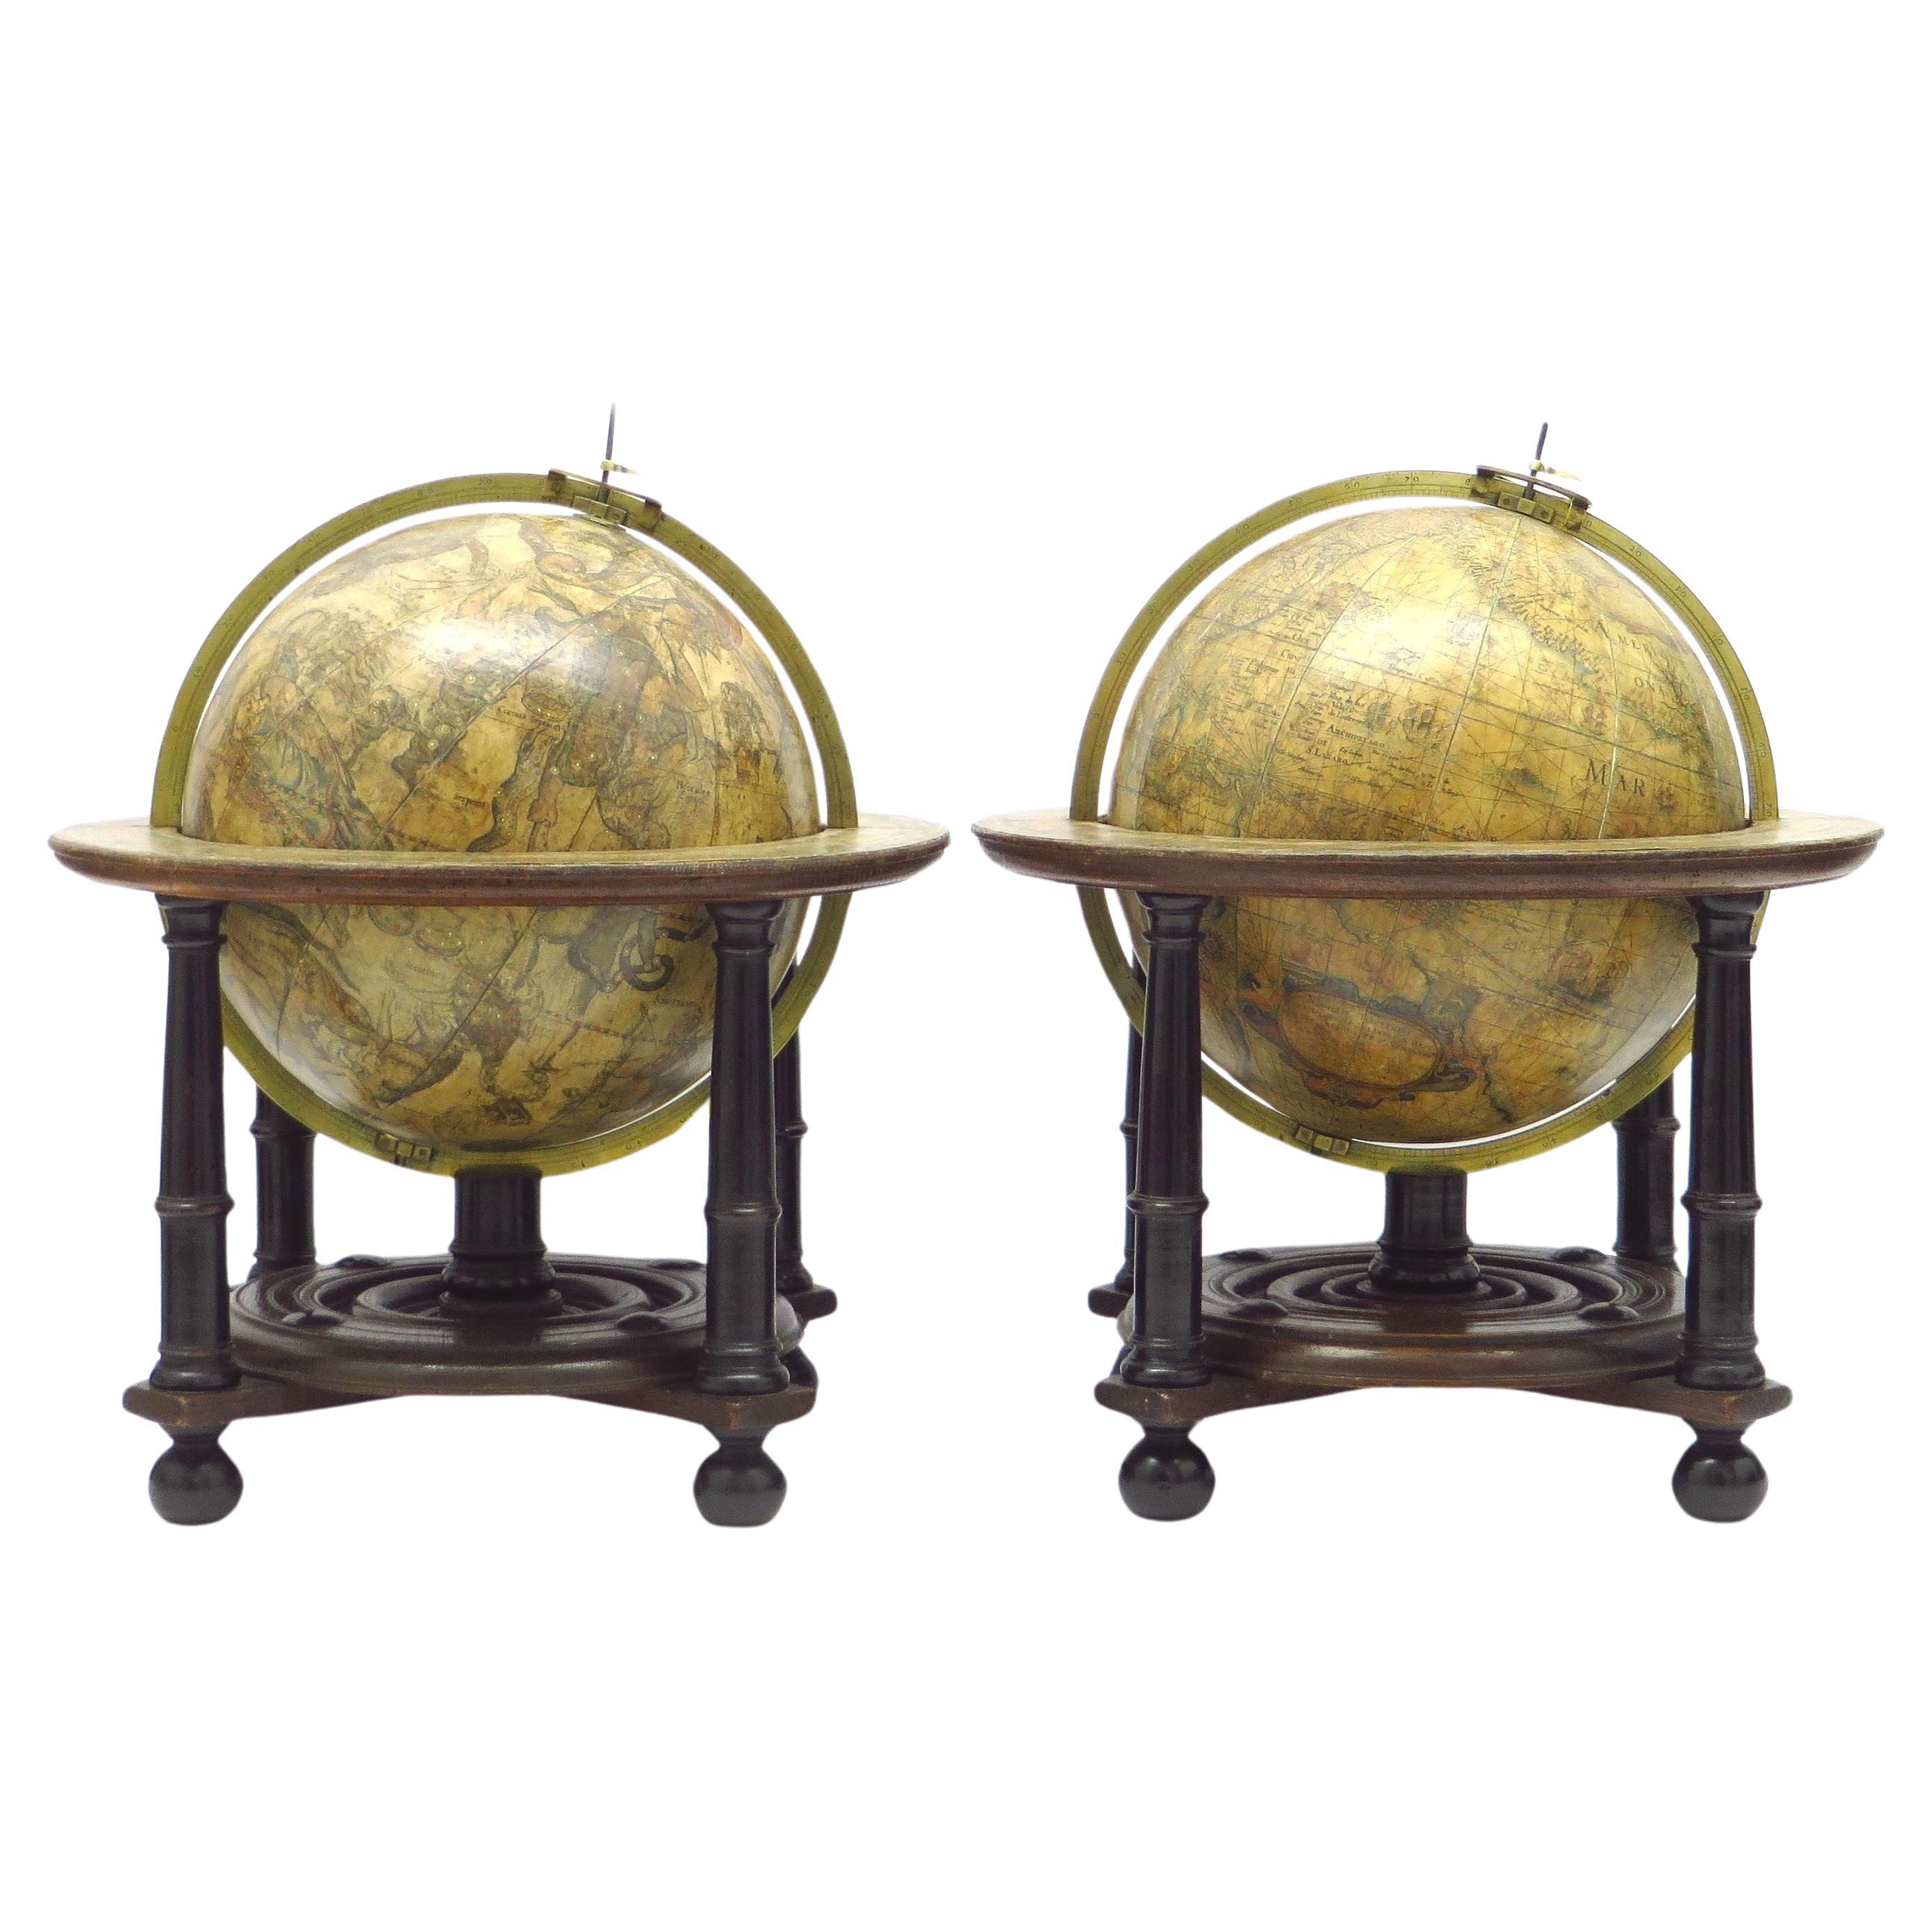         An exceptional pair of BLAEU table globes For Sale